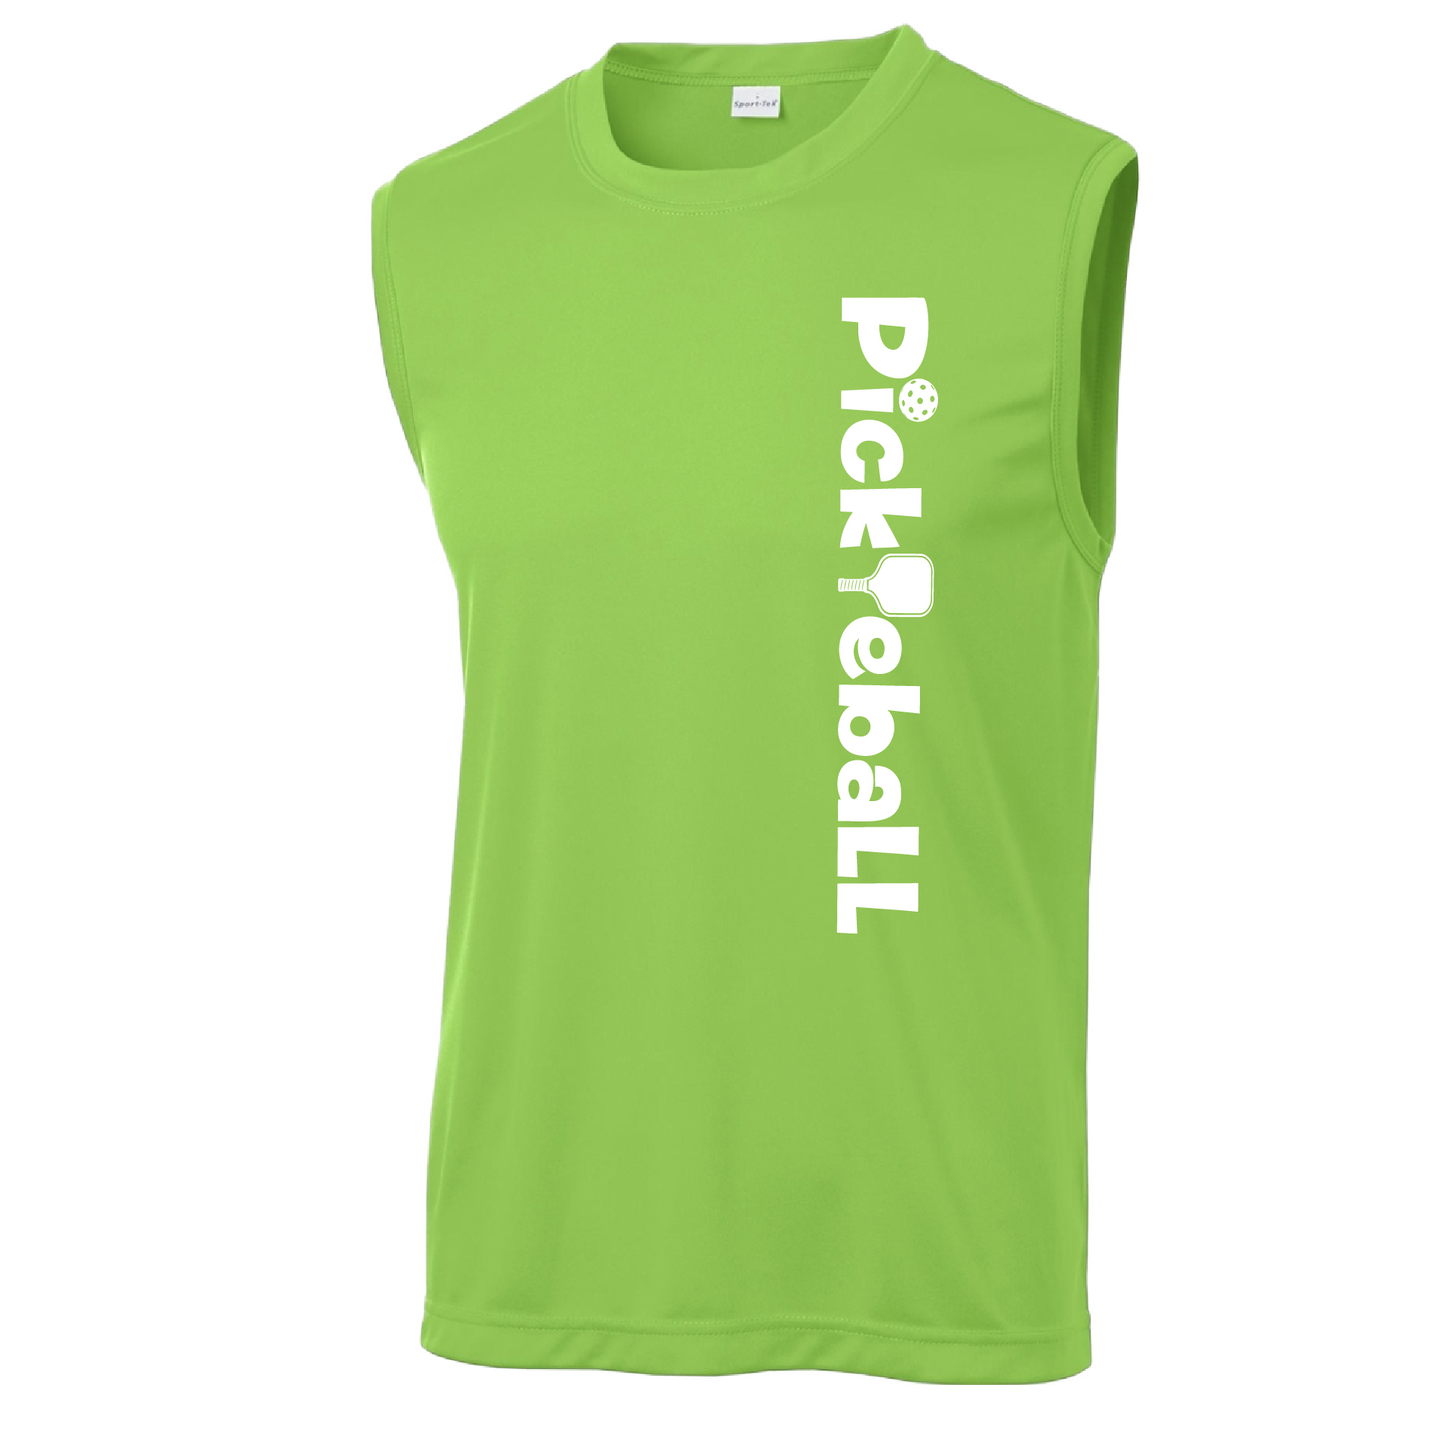 Pickleball Design: Pickleball Horizontal Customizable Location  Men's Style: Sleeveless  Shirts are lightweight, roomy and highly breathable. These moisture-wicking shirts are designed for athletic performance. They feature PosiCharge technology to lock in color and prevent logos from fading. Removable tag and set-in sleeves for comfort. 